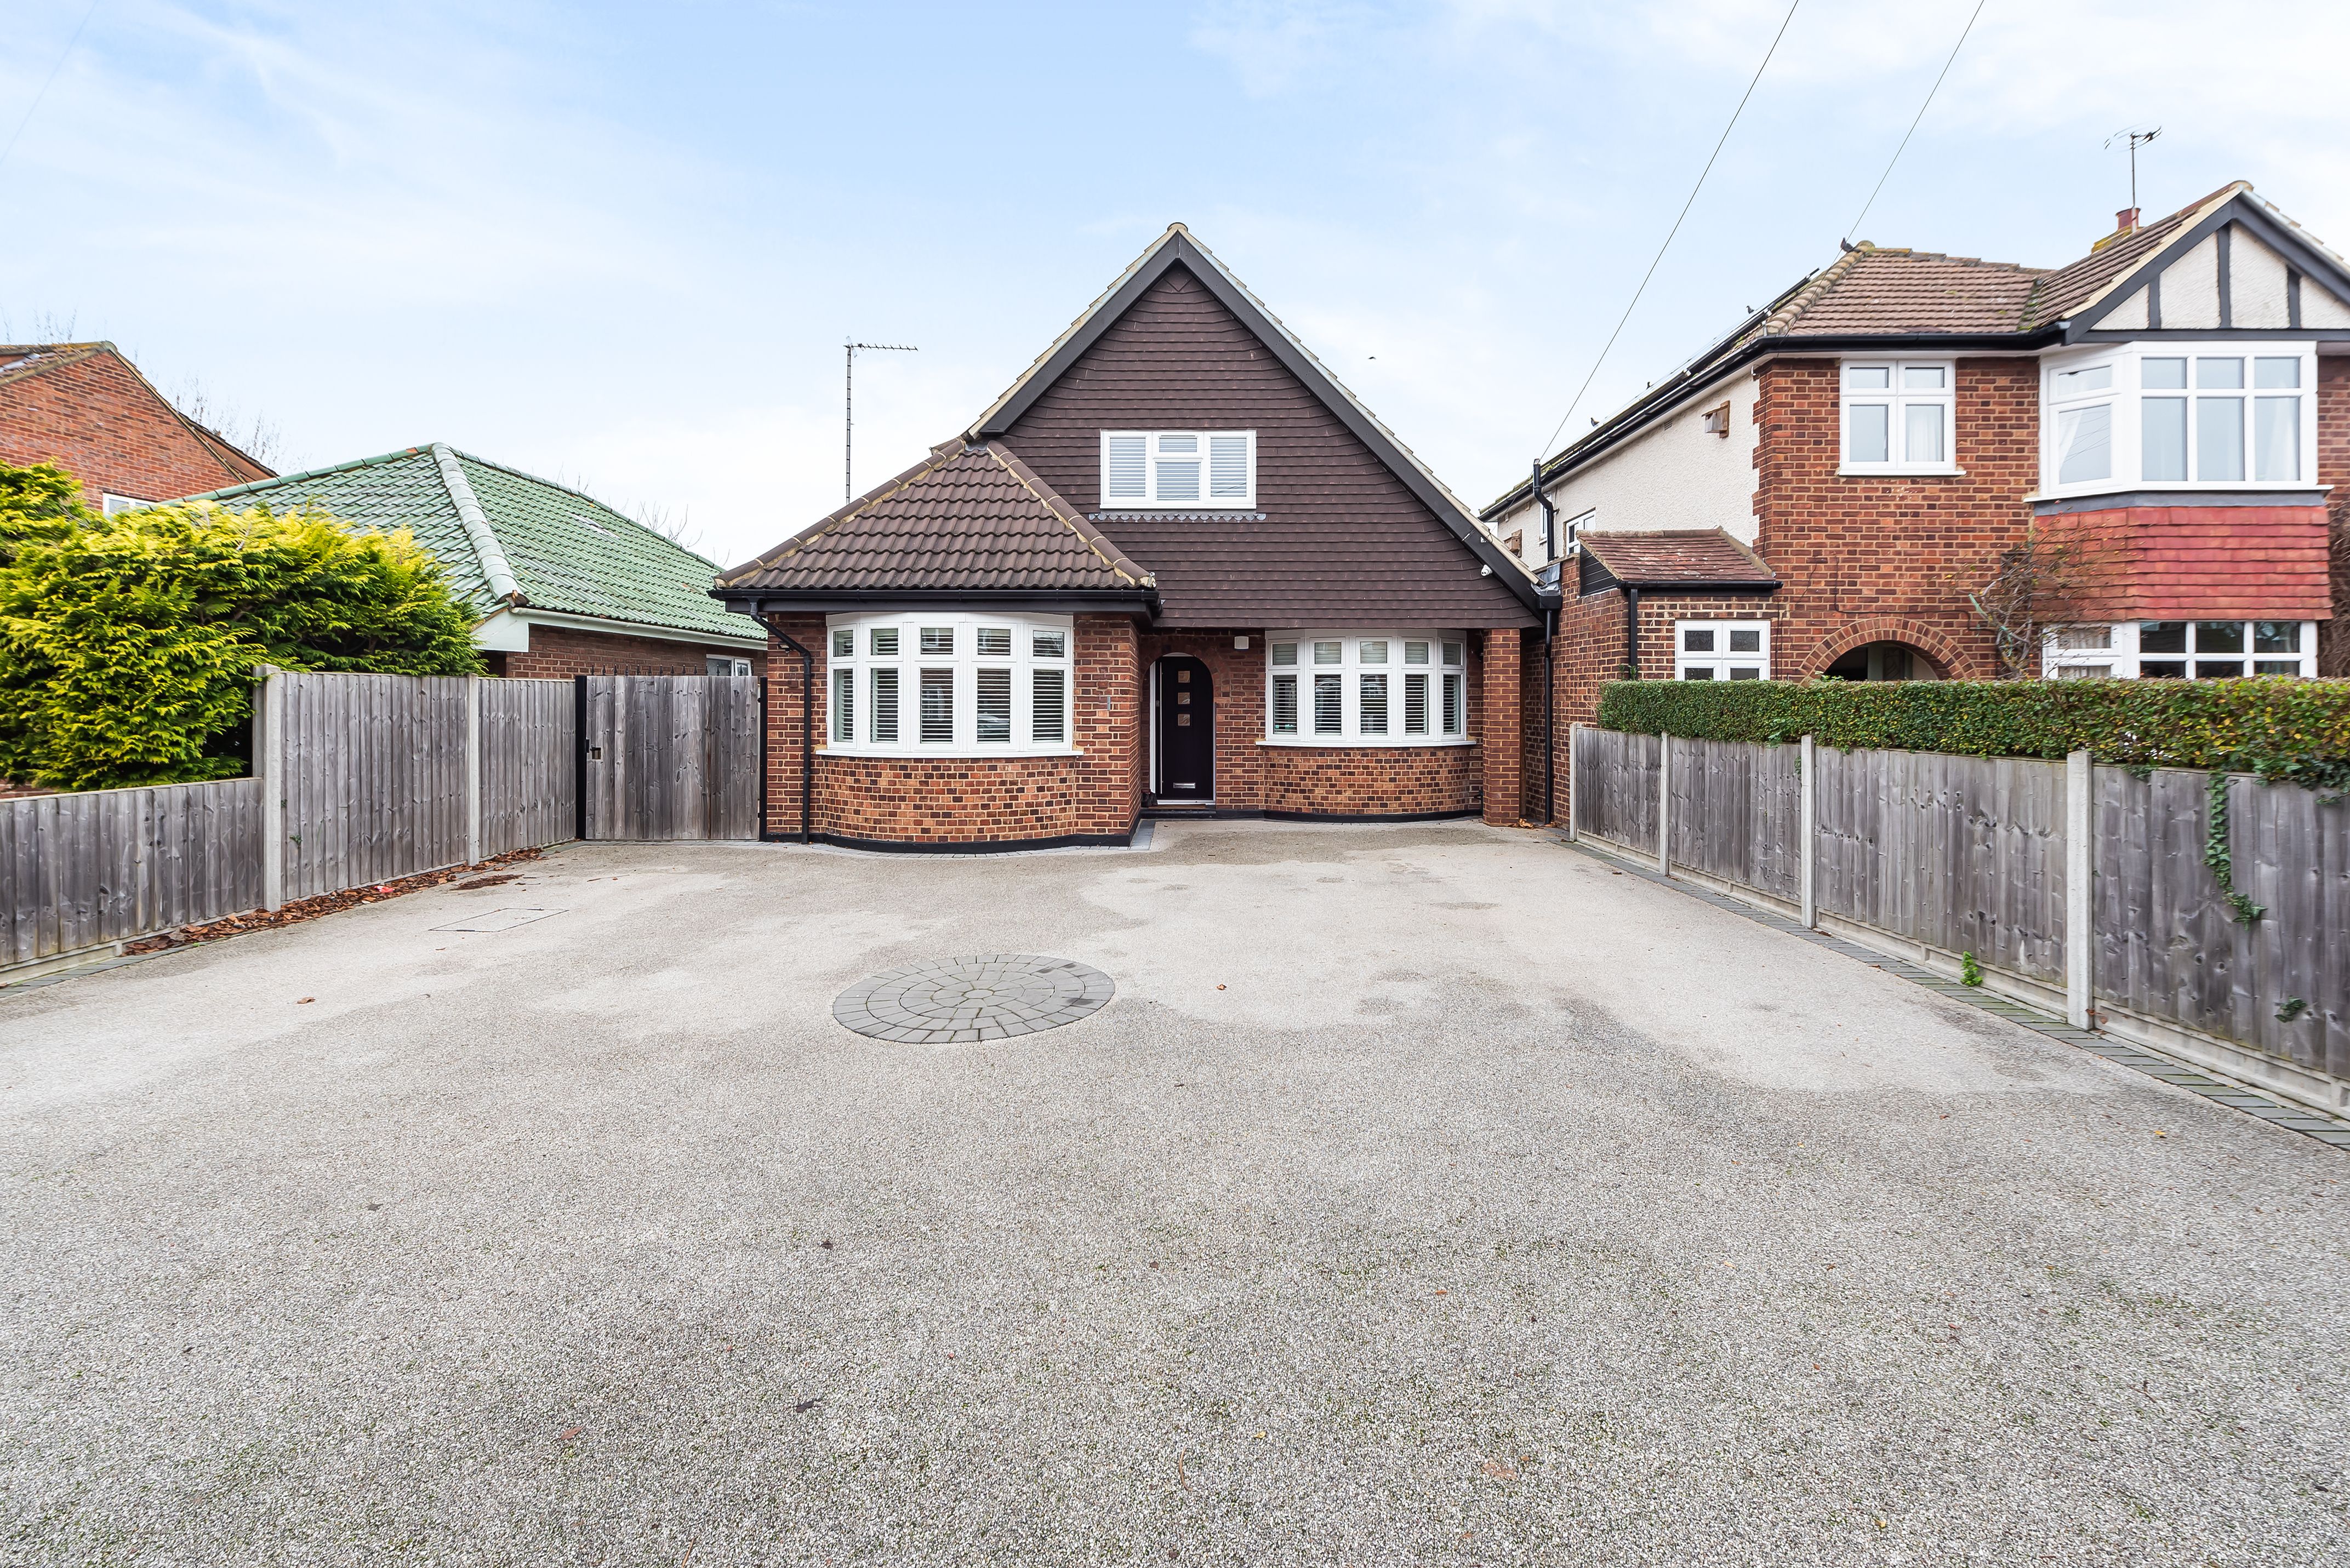 4 bed detached house for sale in Commercial Road, Staines-Upon-Thames - Property Image 1